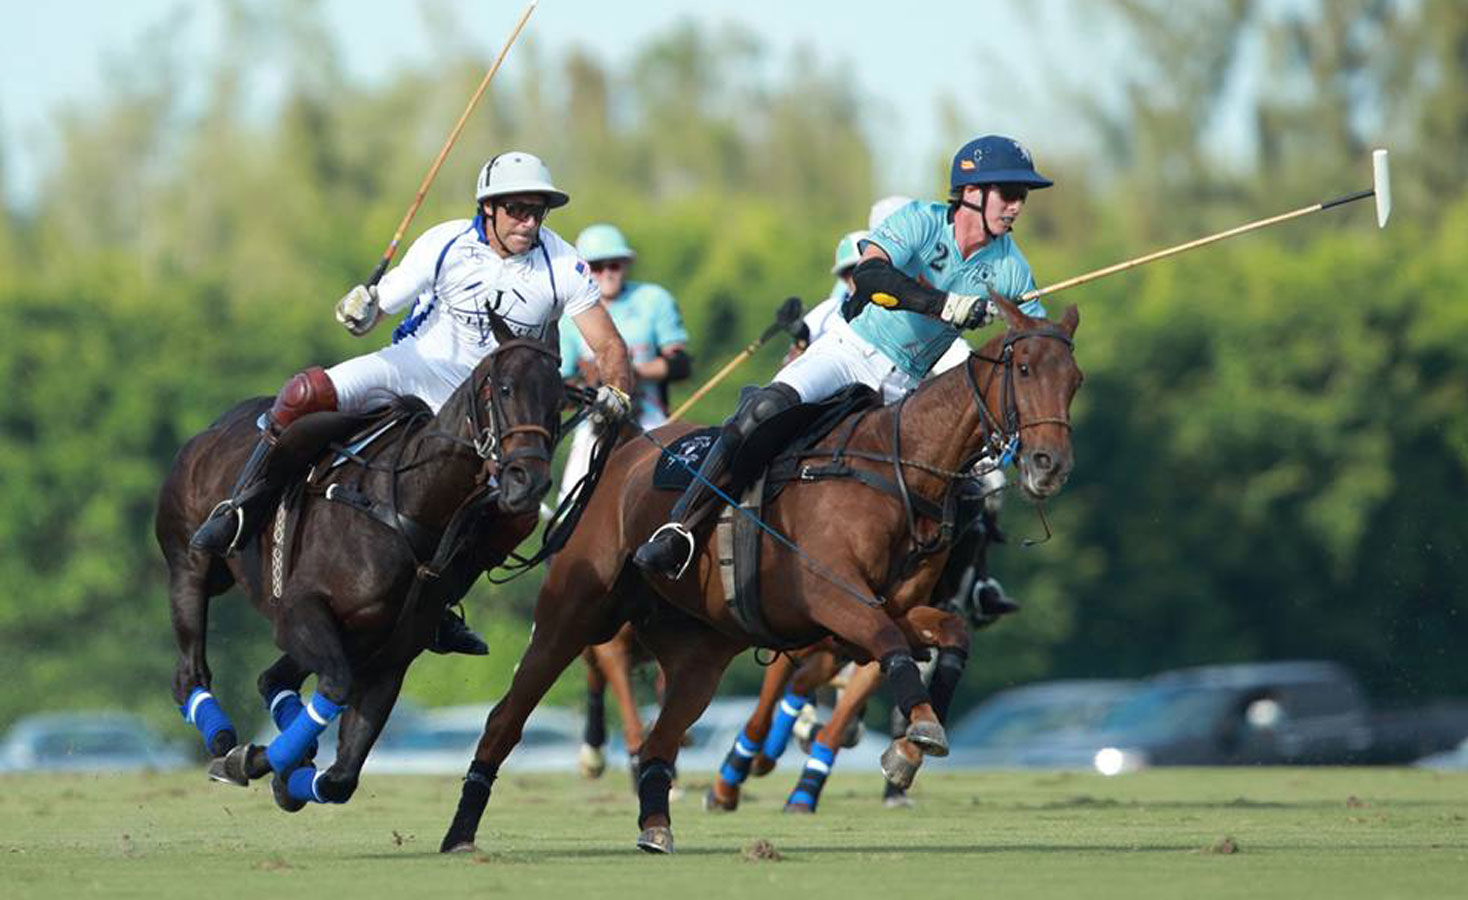 world polo league founders cup